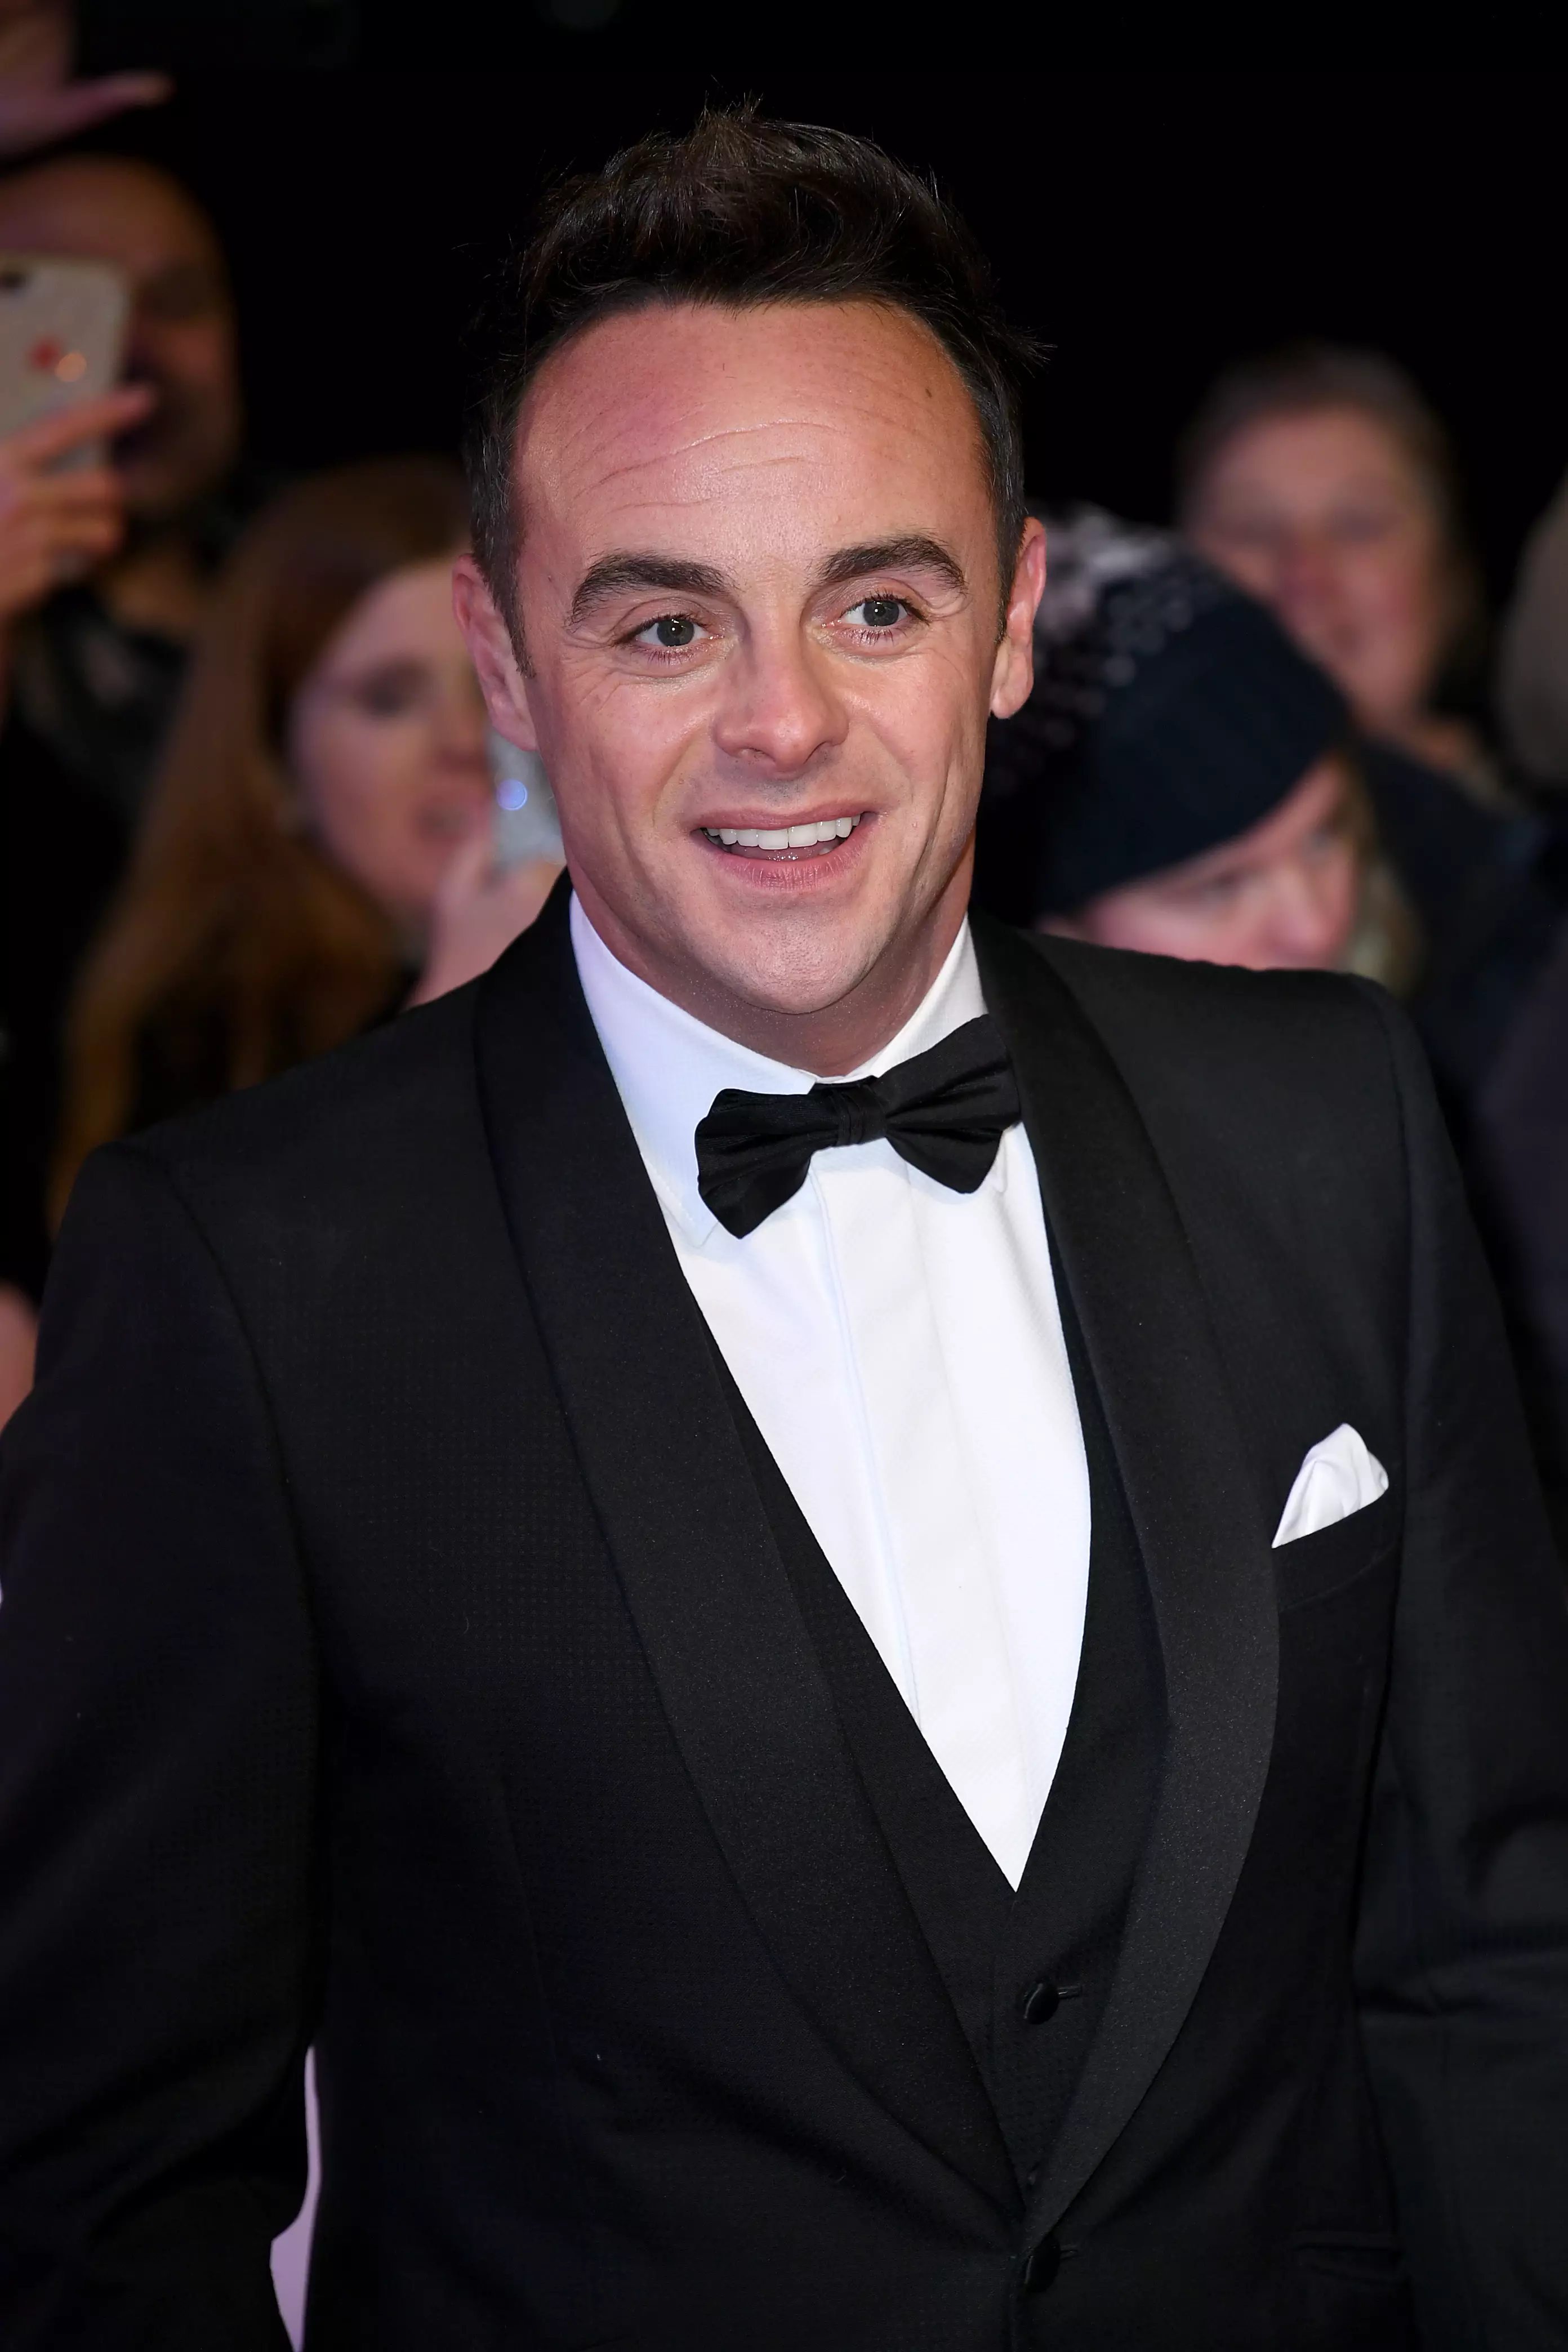 Ant McPartlin went to rehab following his drink driving conviction.